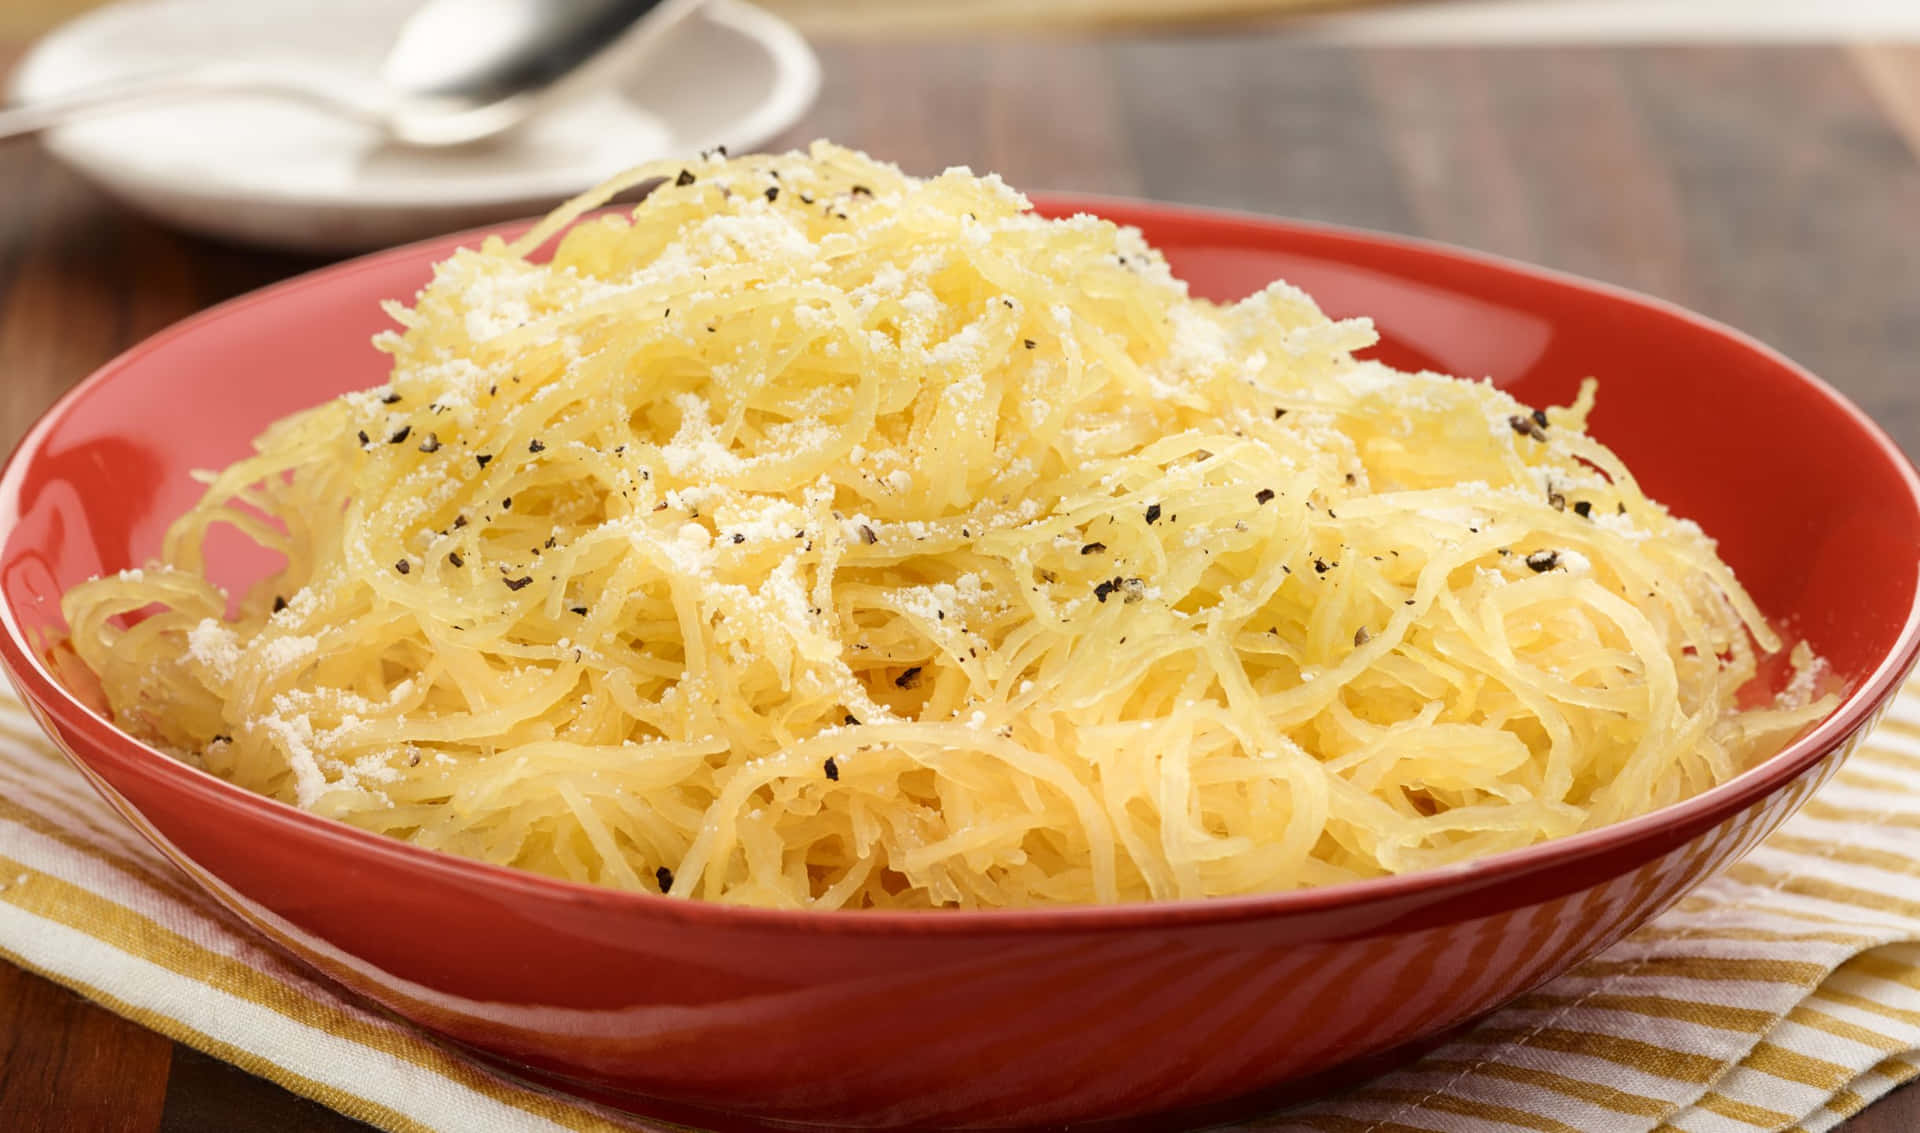 A Bowl Of Spaghetti With Parmesan Cheese